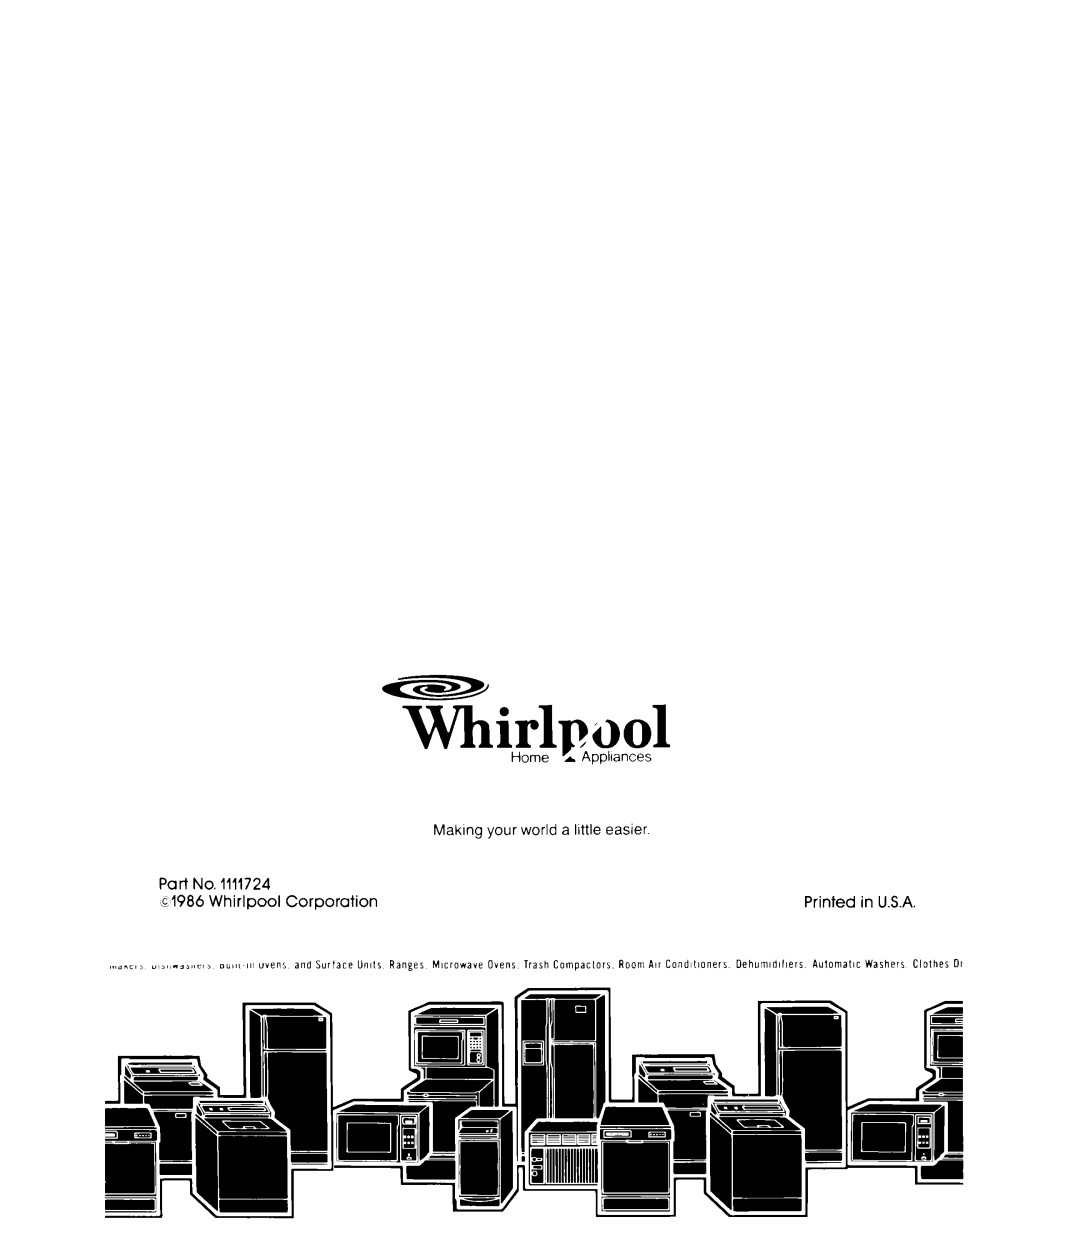 Whirlpool 3ED26MM manual Makmg your world a little easier, ~1986 Whirlpool Corporation, Home, Appliances 